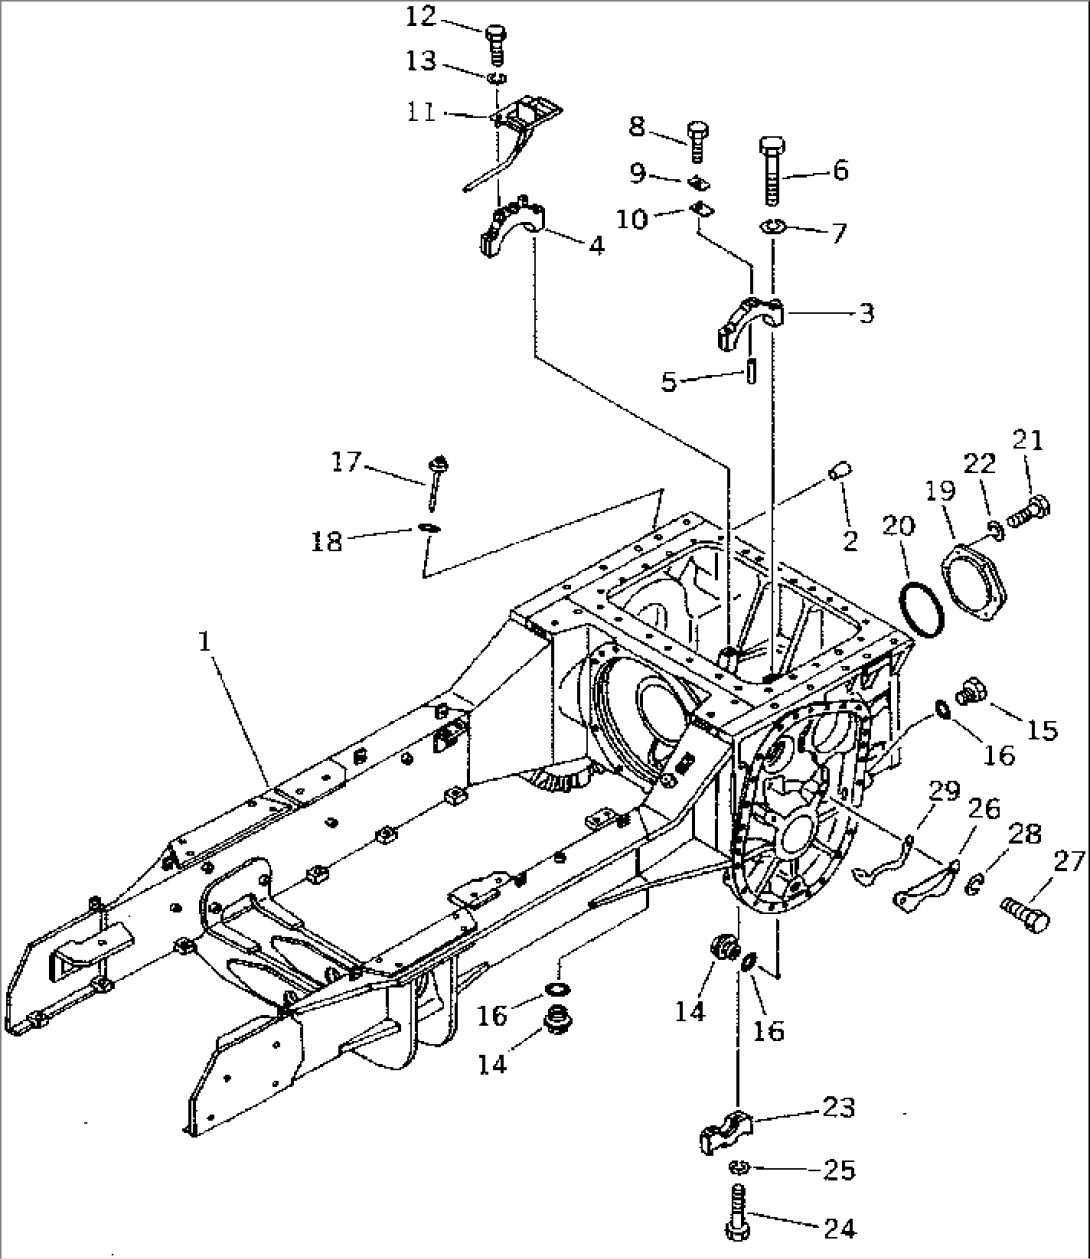 STEERING CASE AND MAIN FRAME (FOR STRENGTHENED TRACK)